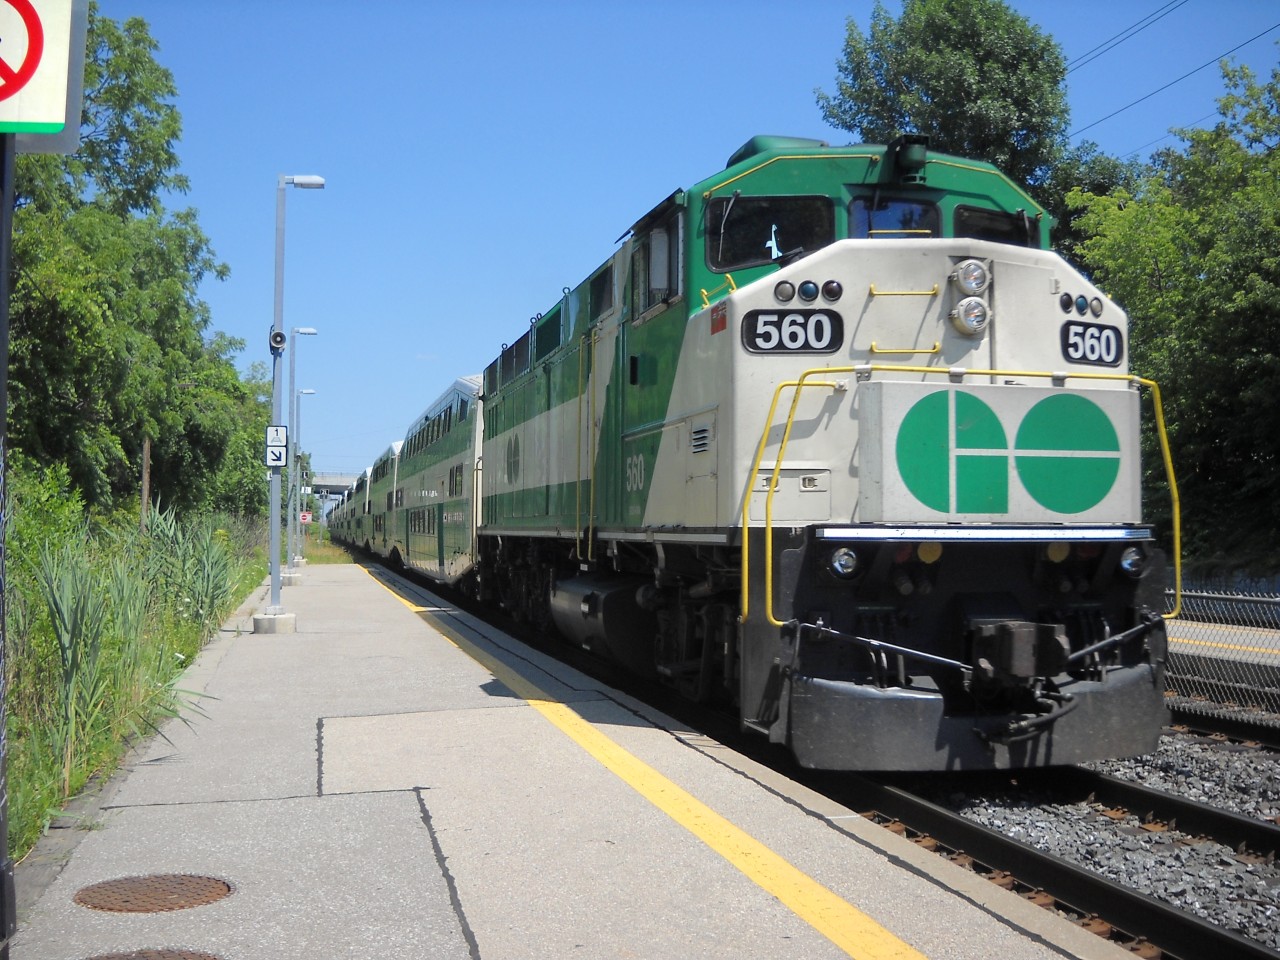 GO Transit F59PH #560, one of the last F59PH units in its fleet, is shown heading west as it pulls into Long Branch station with a 10 car consist, and F59PH #559 trailing.  #560 is located, and replacing, a cab car which normally would be used when trains are heading west on the Lakeshore line.